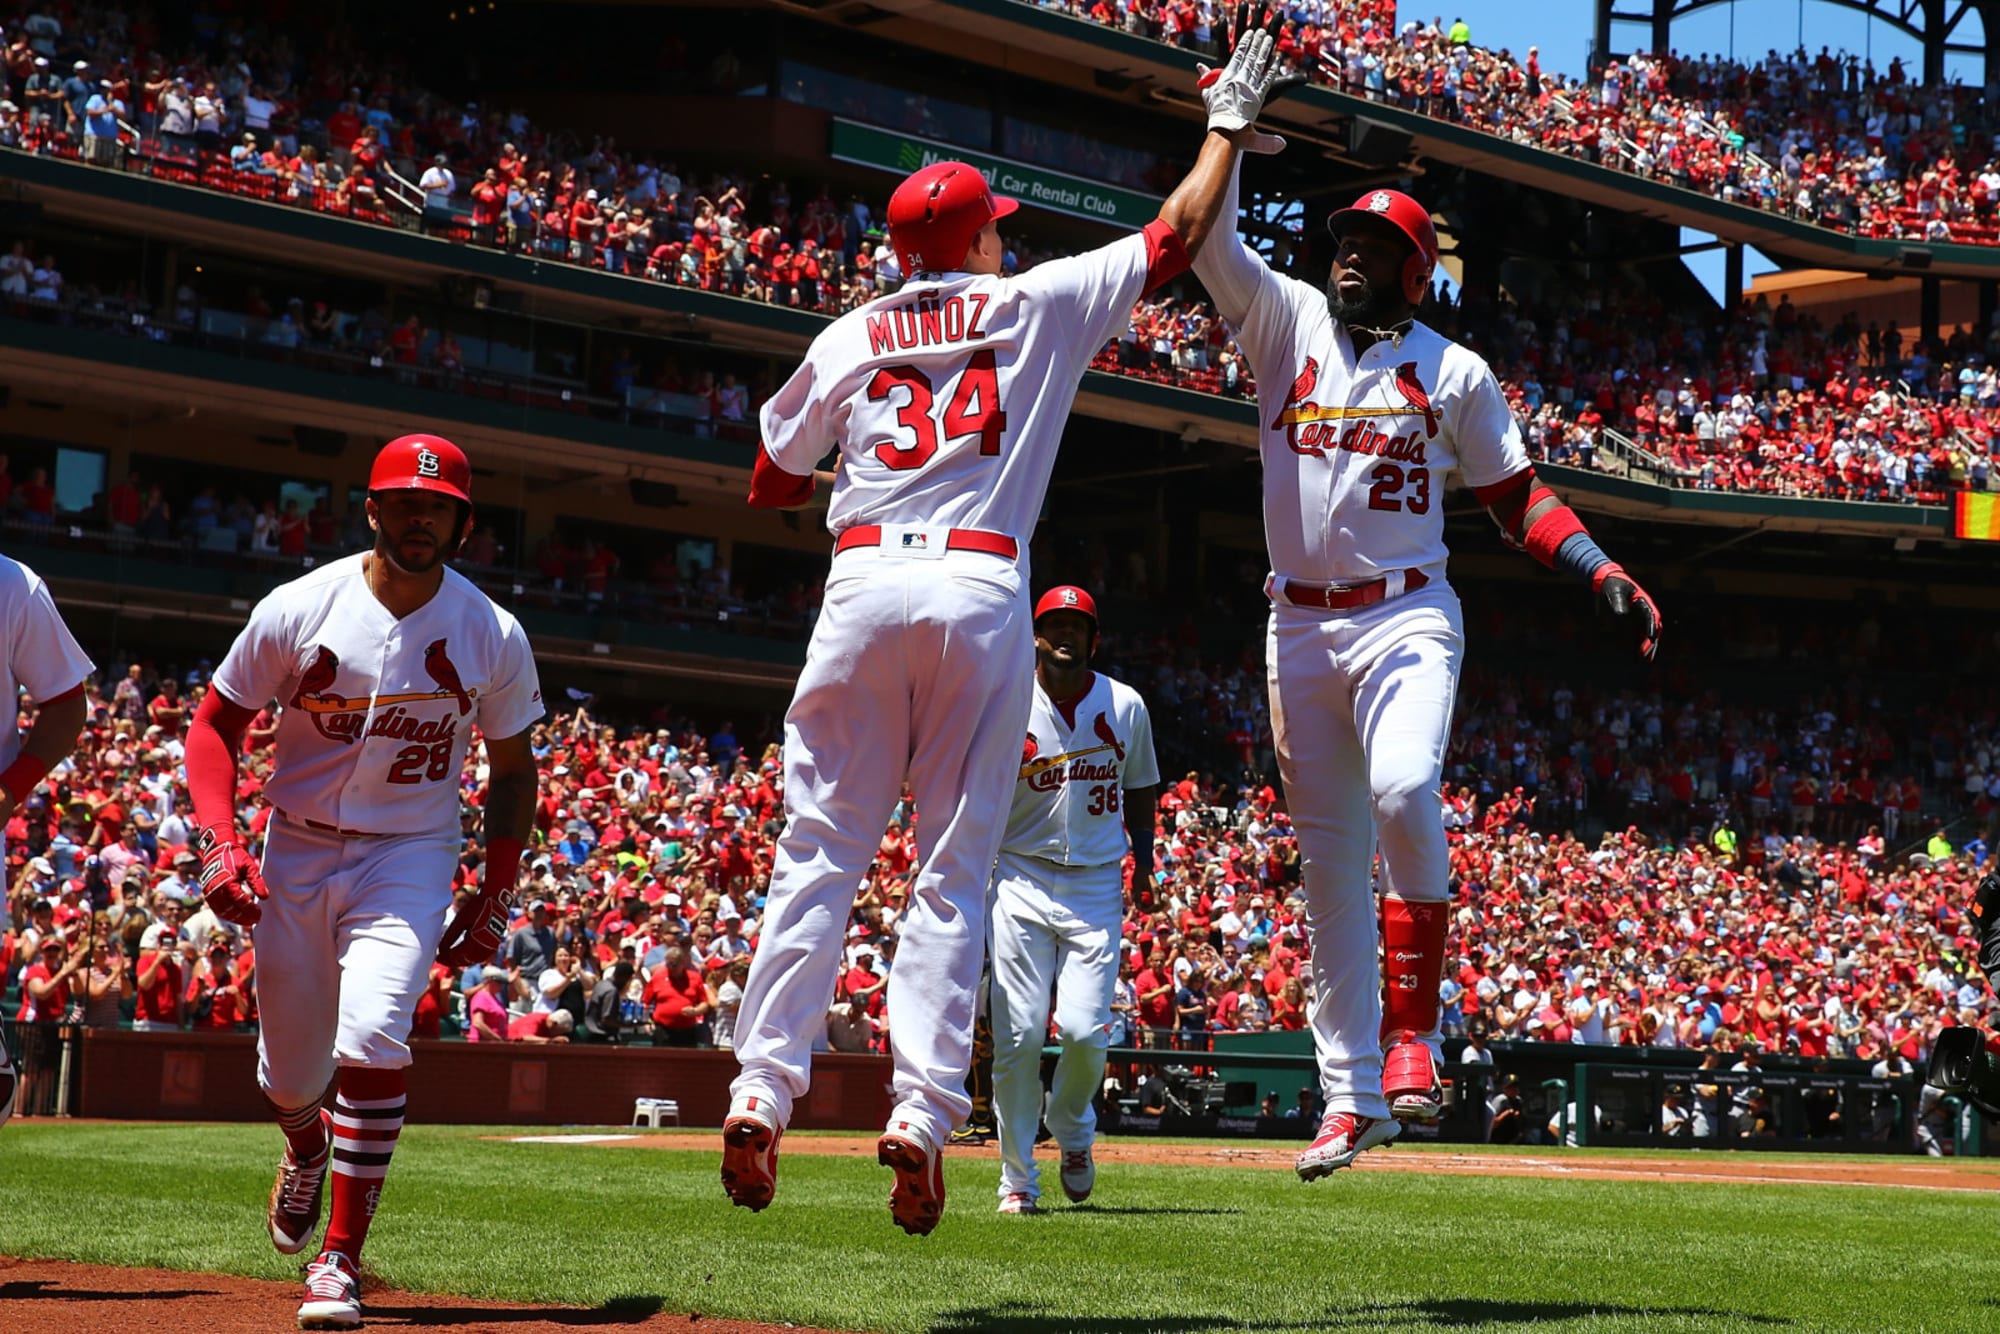 St. Louis Cardinals Draft day one includes two sluggers and an arm